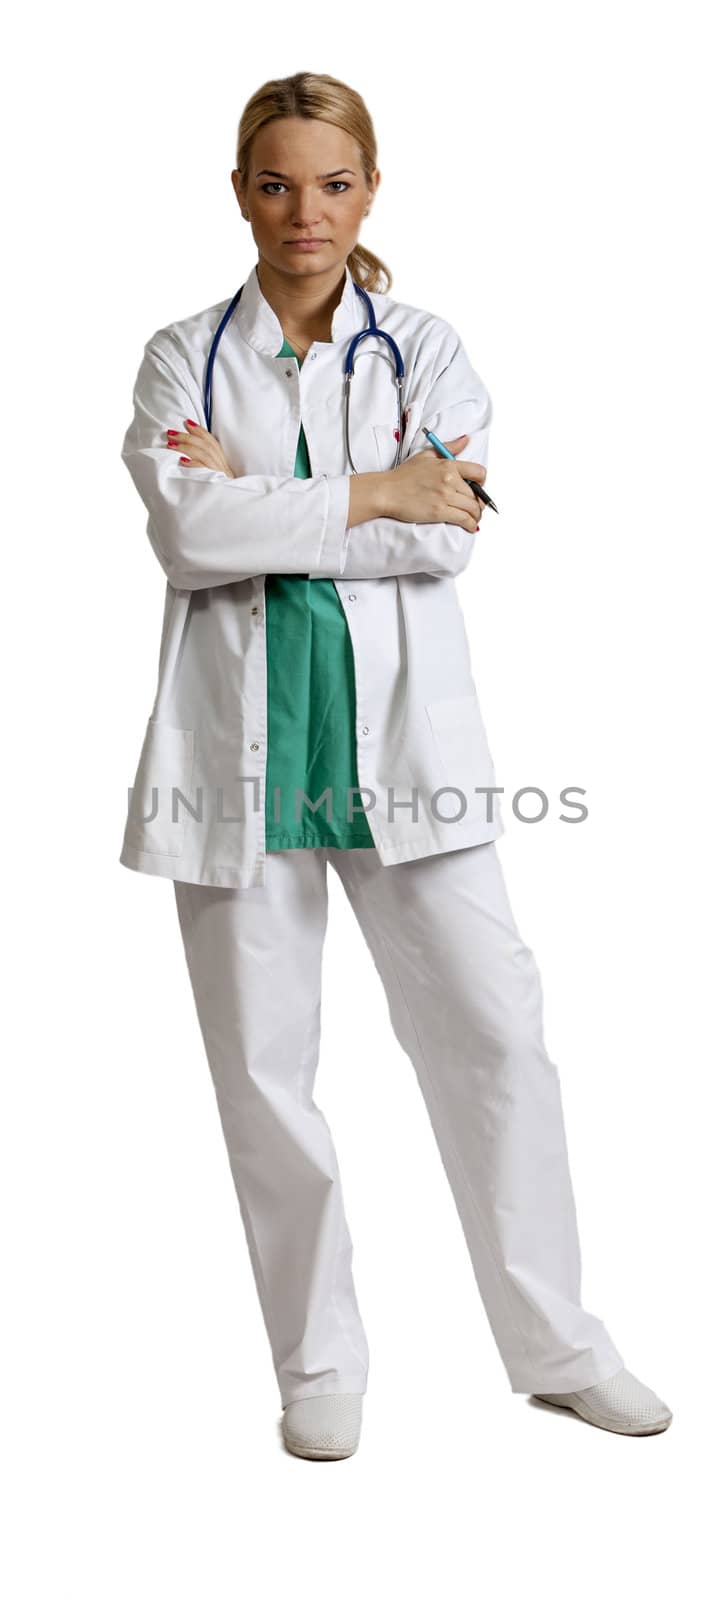 Image of a young blonde woman doctor isolated against a white background.